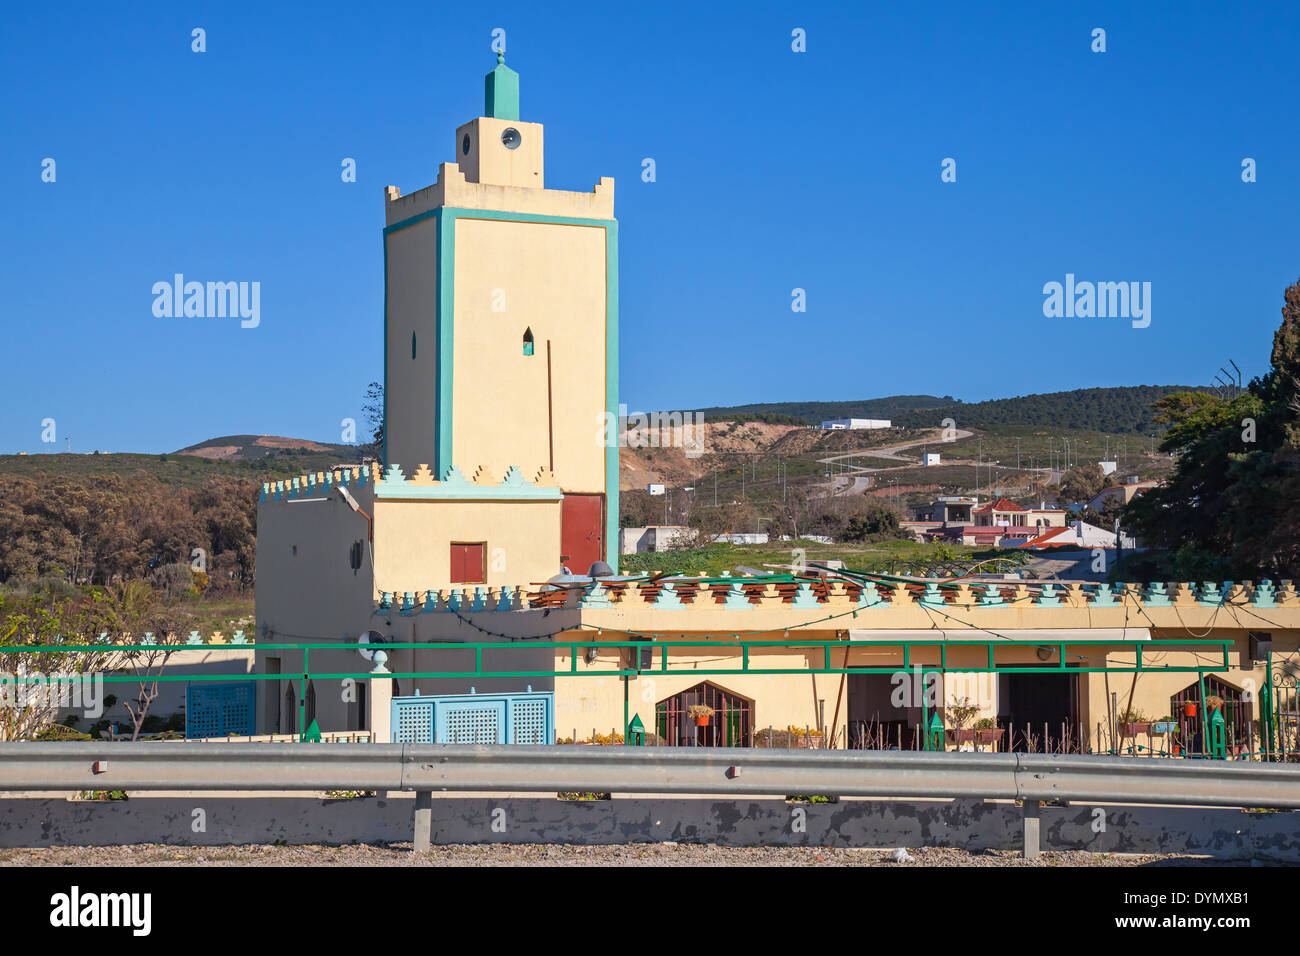 Modern yellow mosque building. Tangier town, Morocco Stock Photo